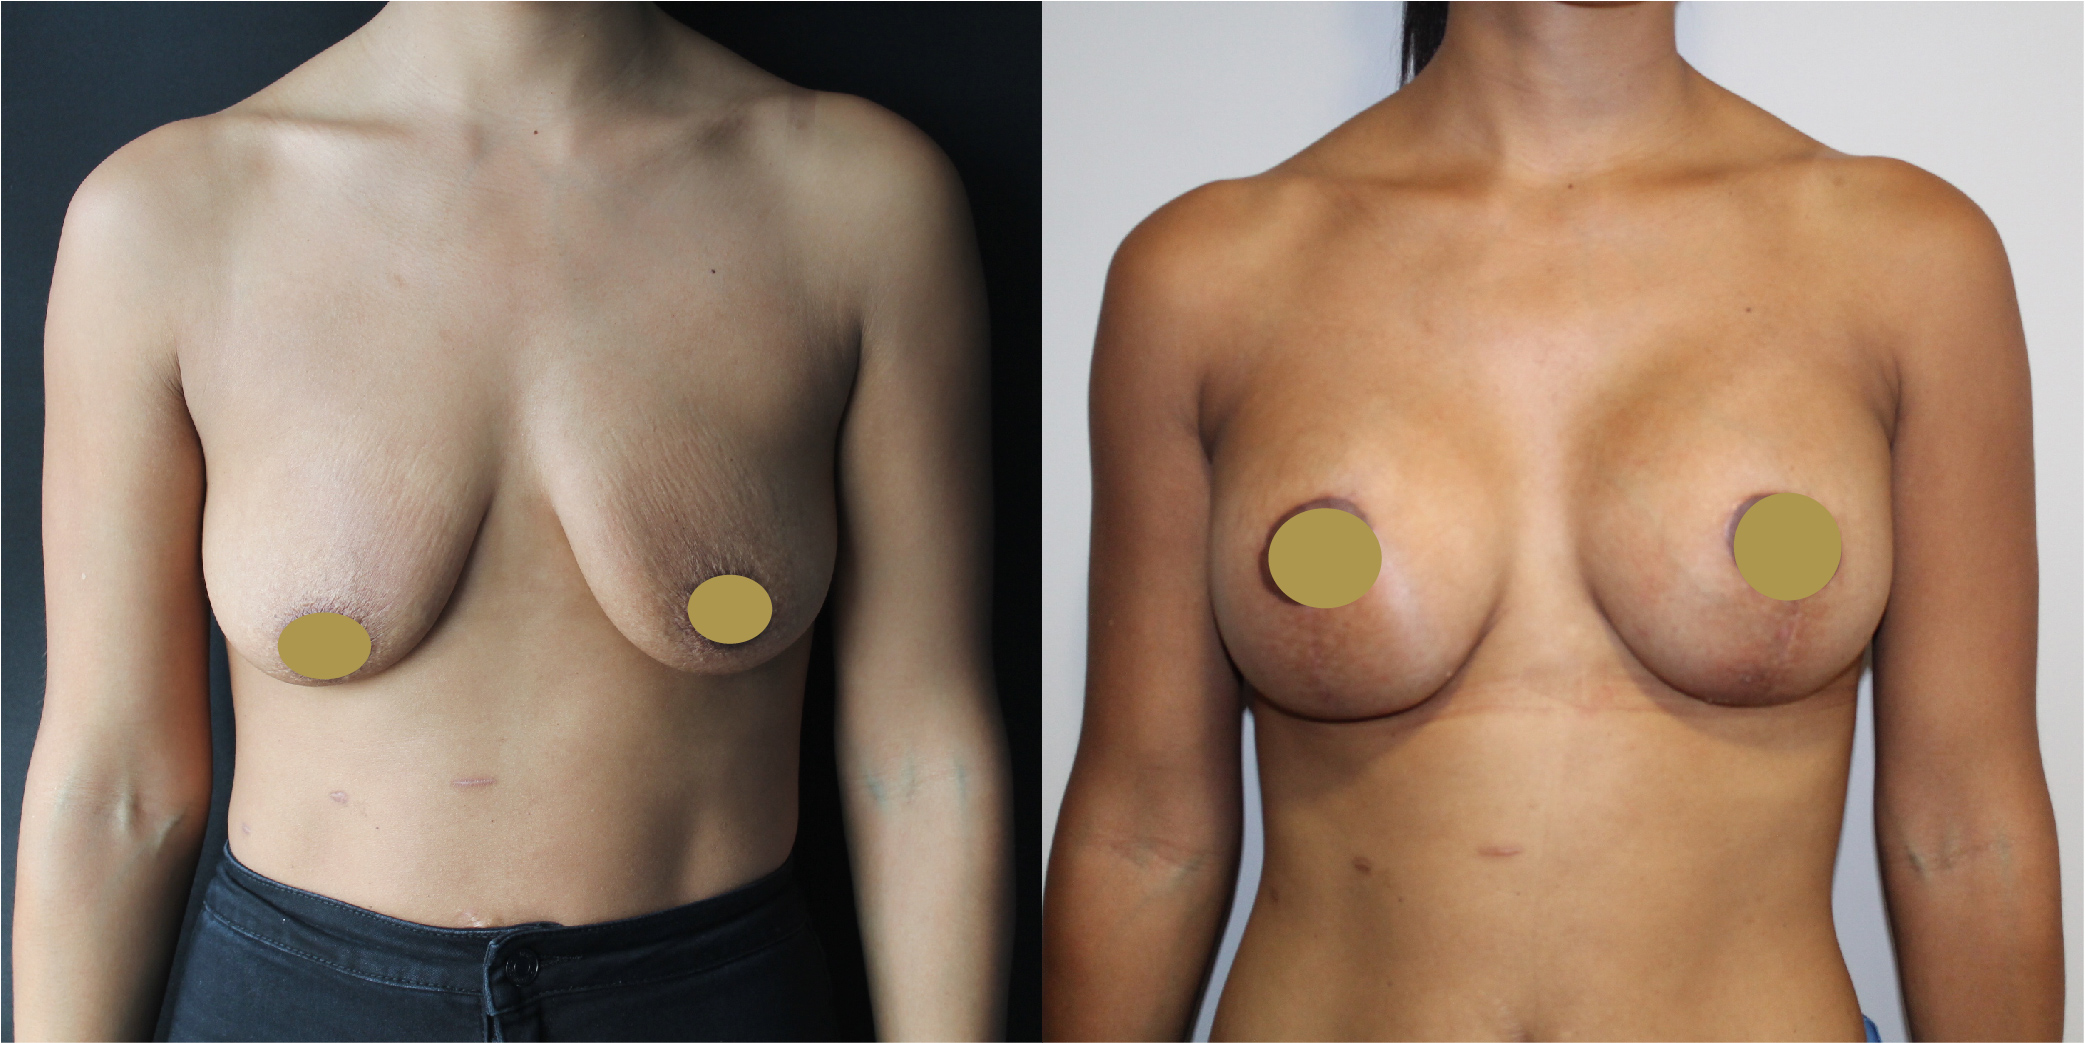 Breast Augmentation Mastopexy Before & After Image